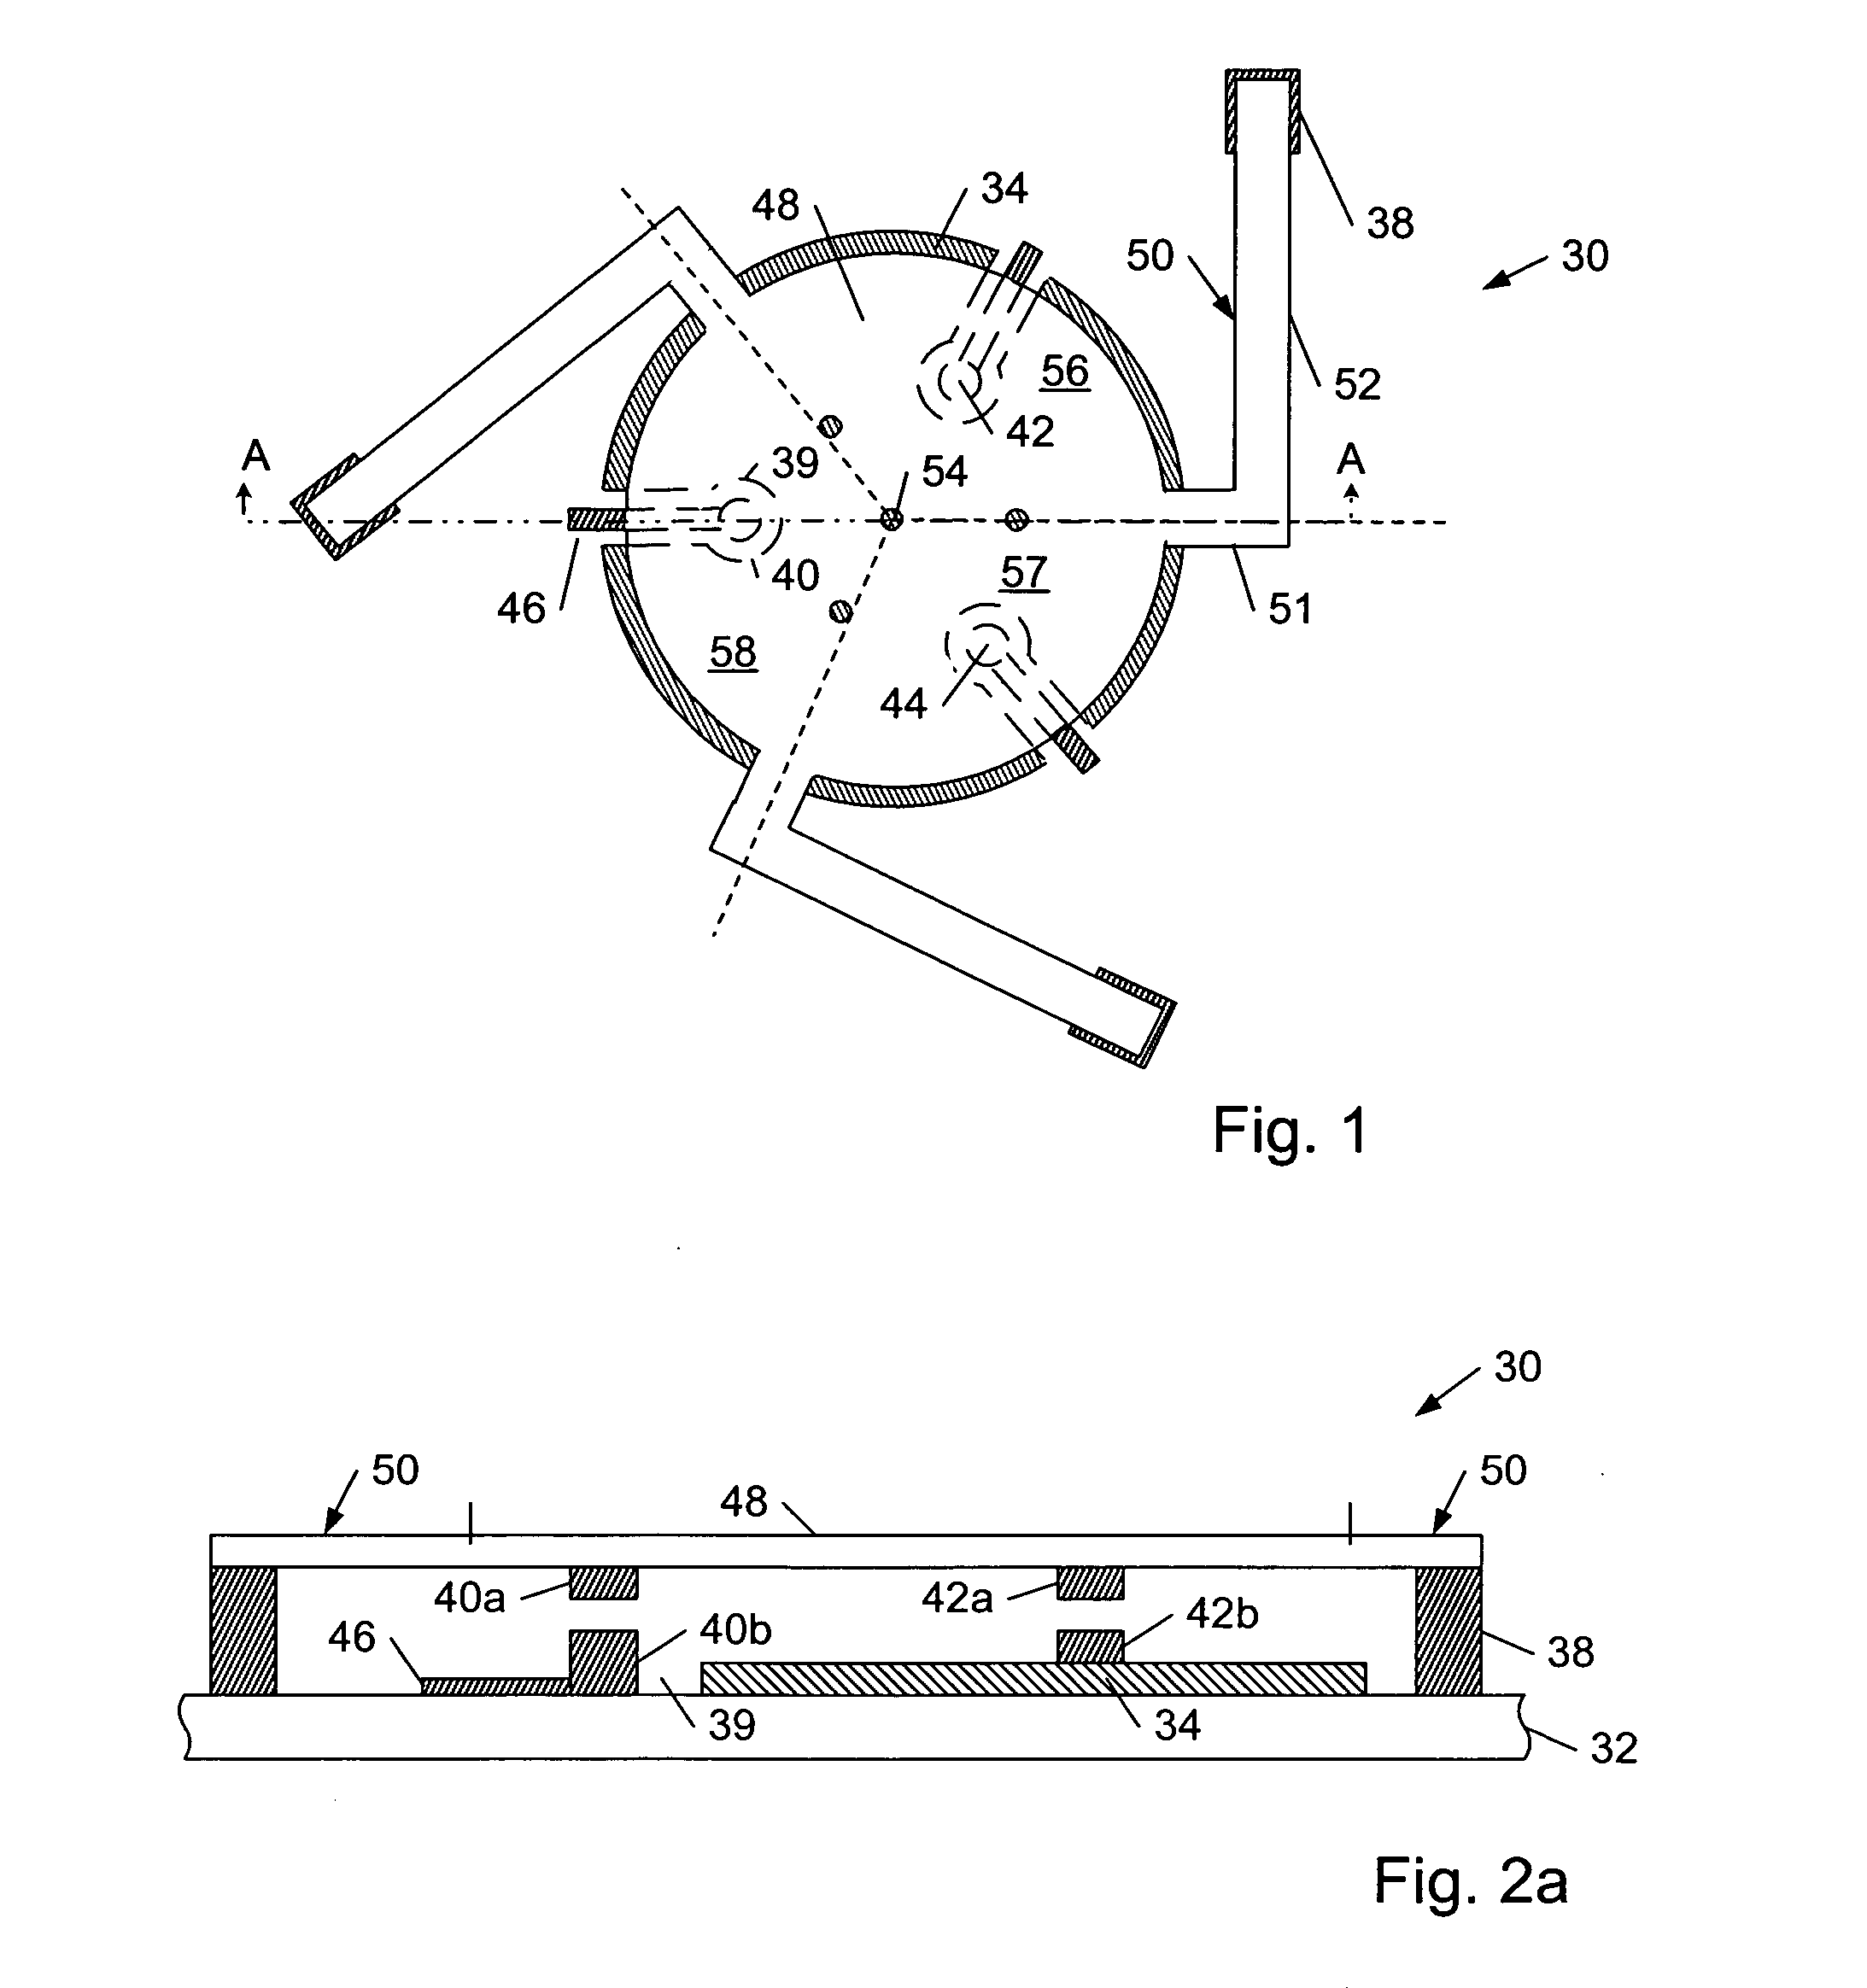 Plate-based microelectromechanical switch having a three-fold relative arrangement of contact structures and support arms